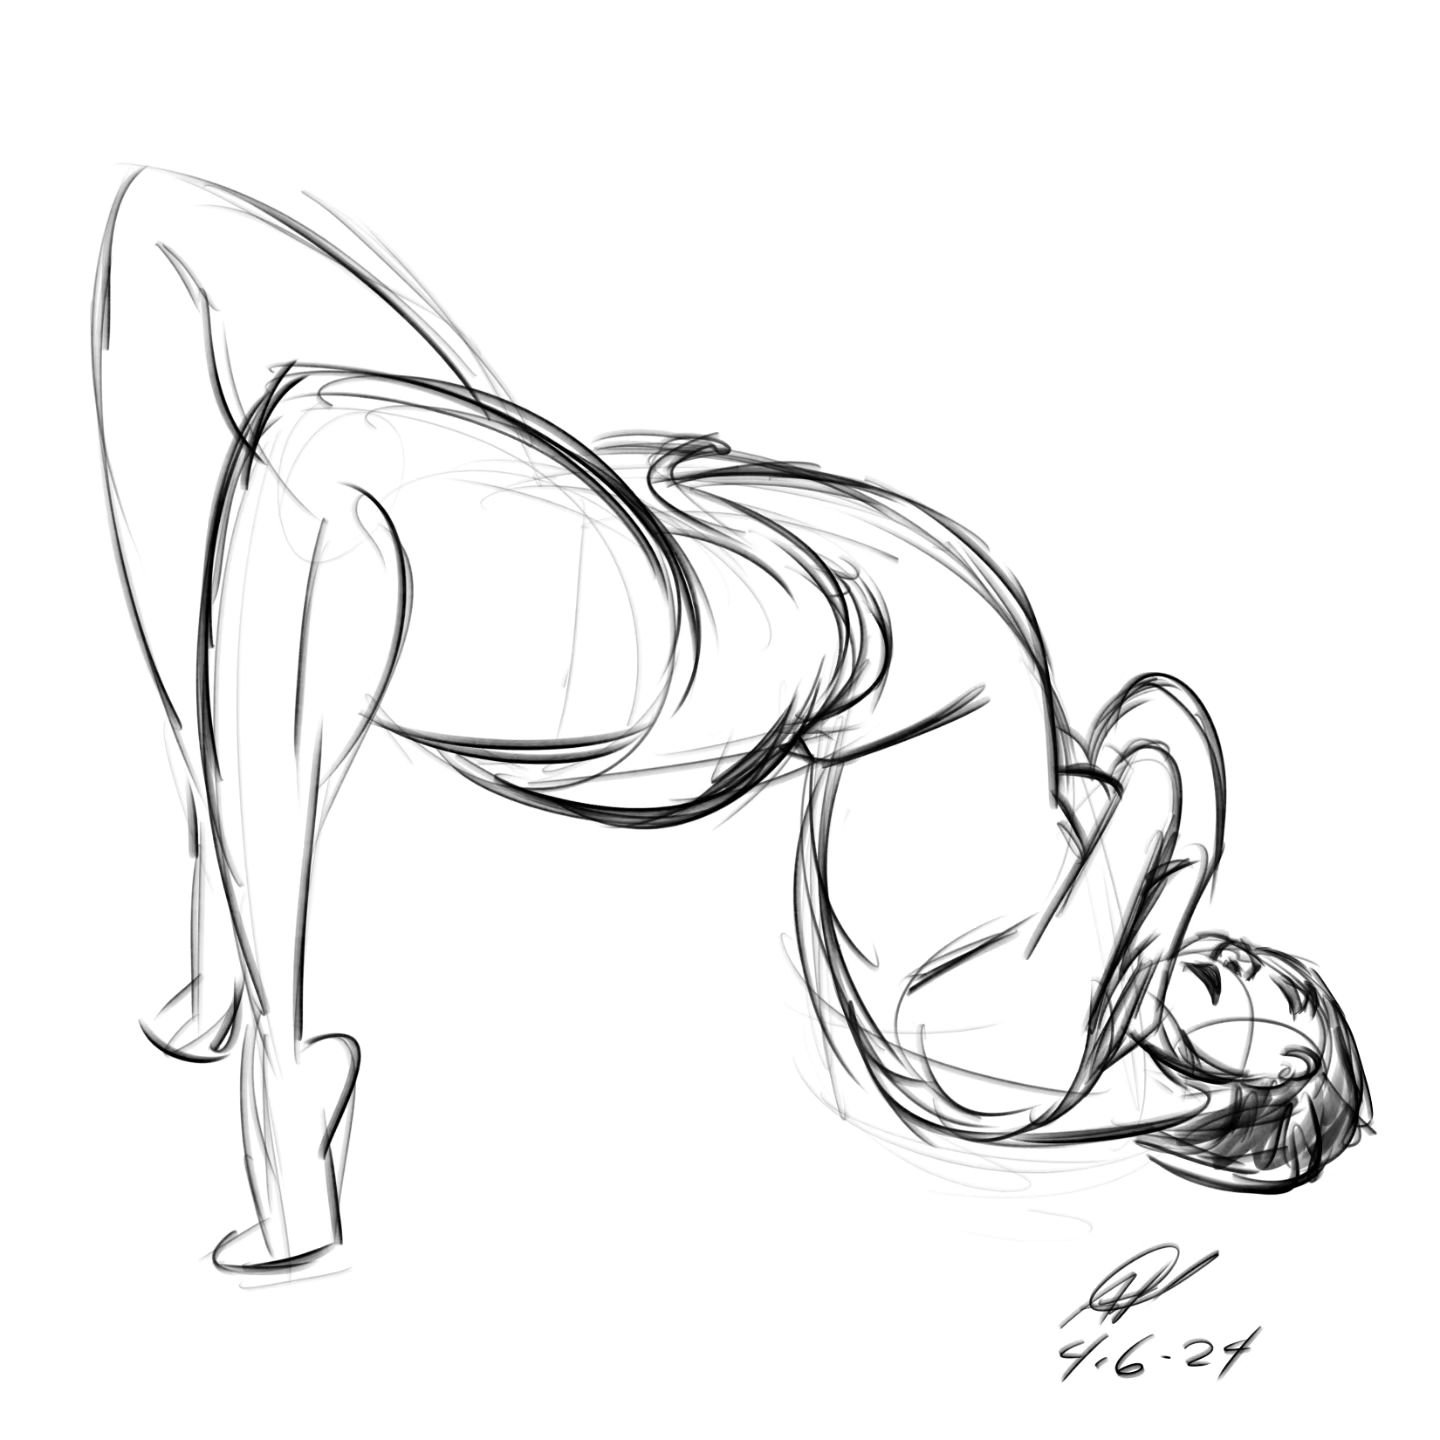 2 minute poses with @artmodelmusingsinc . I really enjoyed going for the flow on these. #drawings #gestures #figuredrawing #lifedrawing #sketches #quicksketch #digital #digitalart